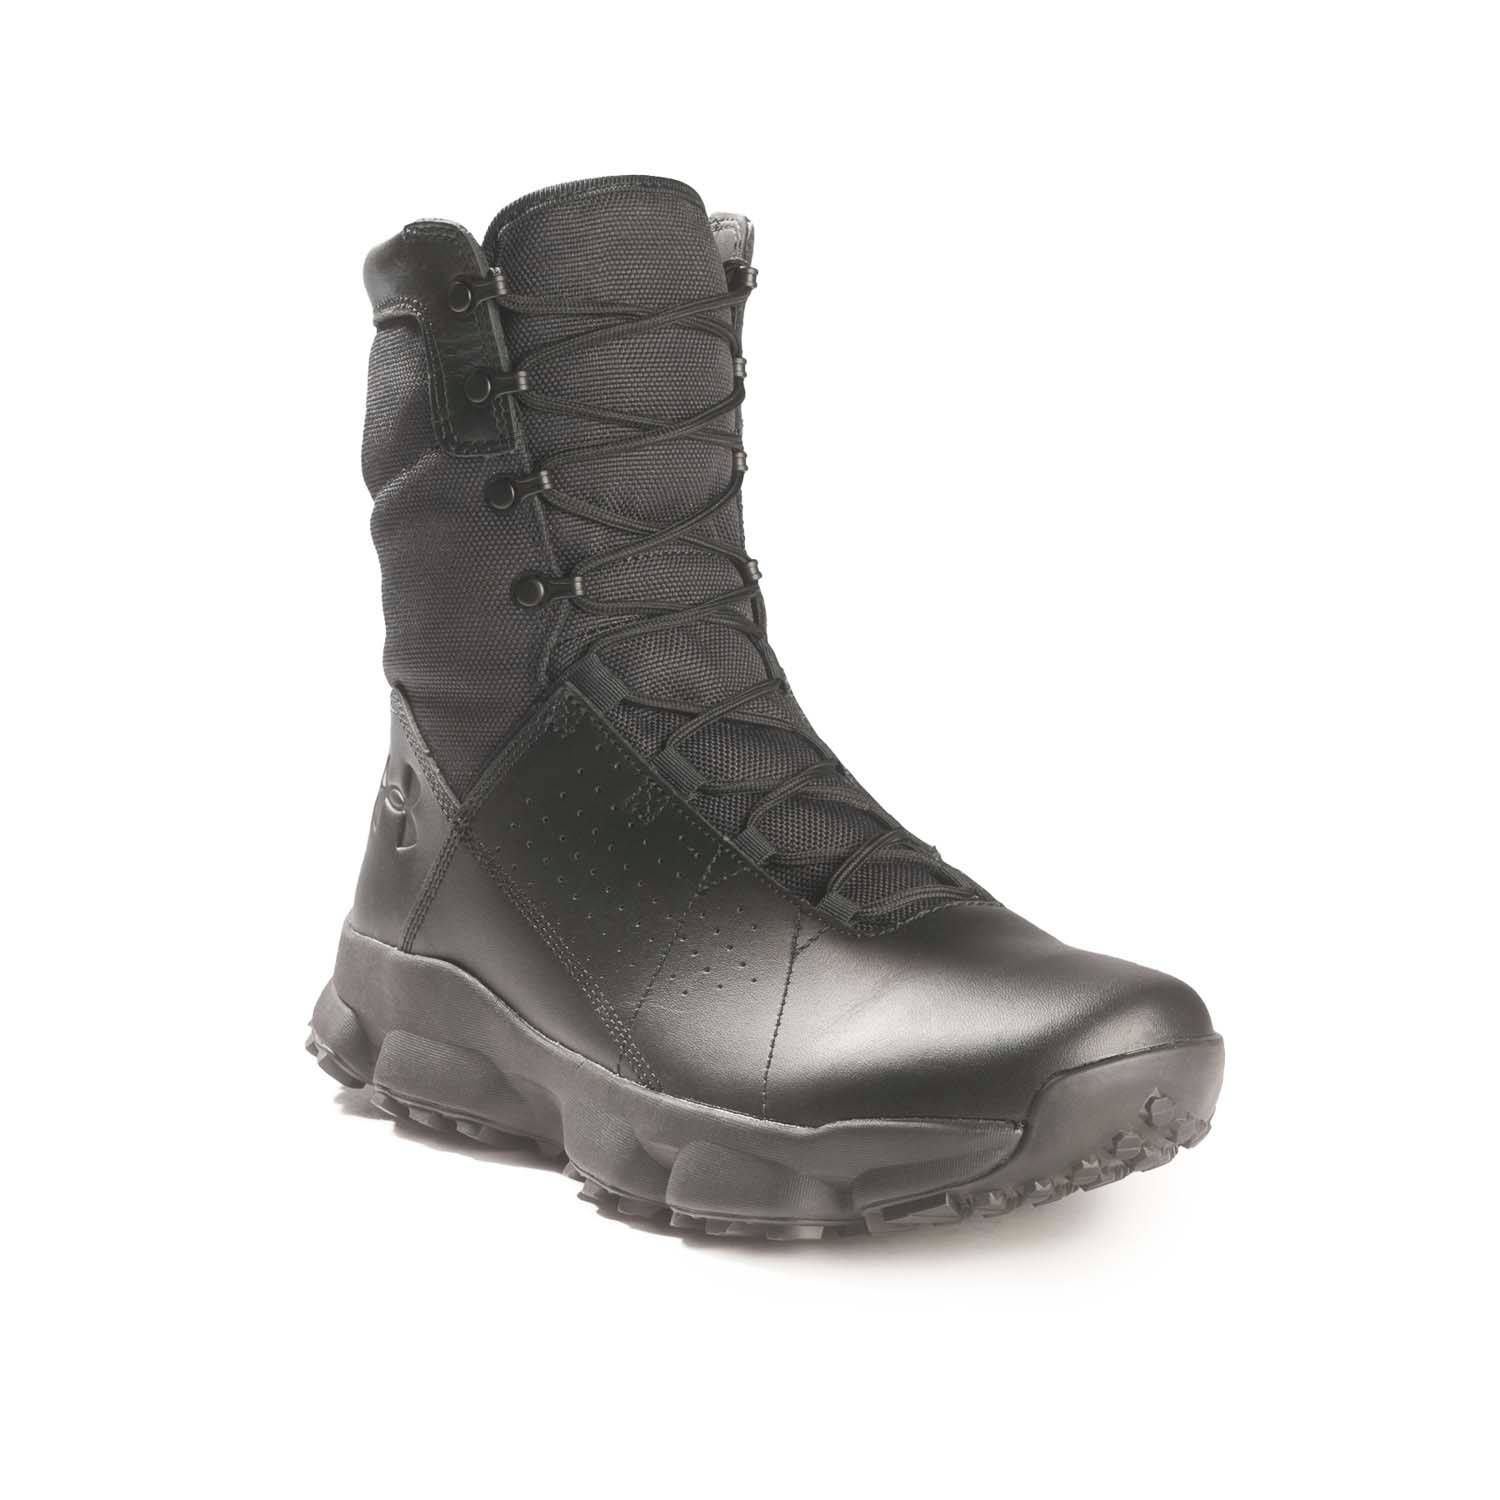 Buy > tac boots > in stock